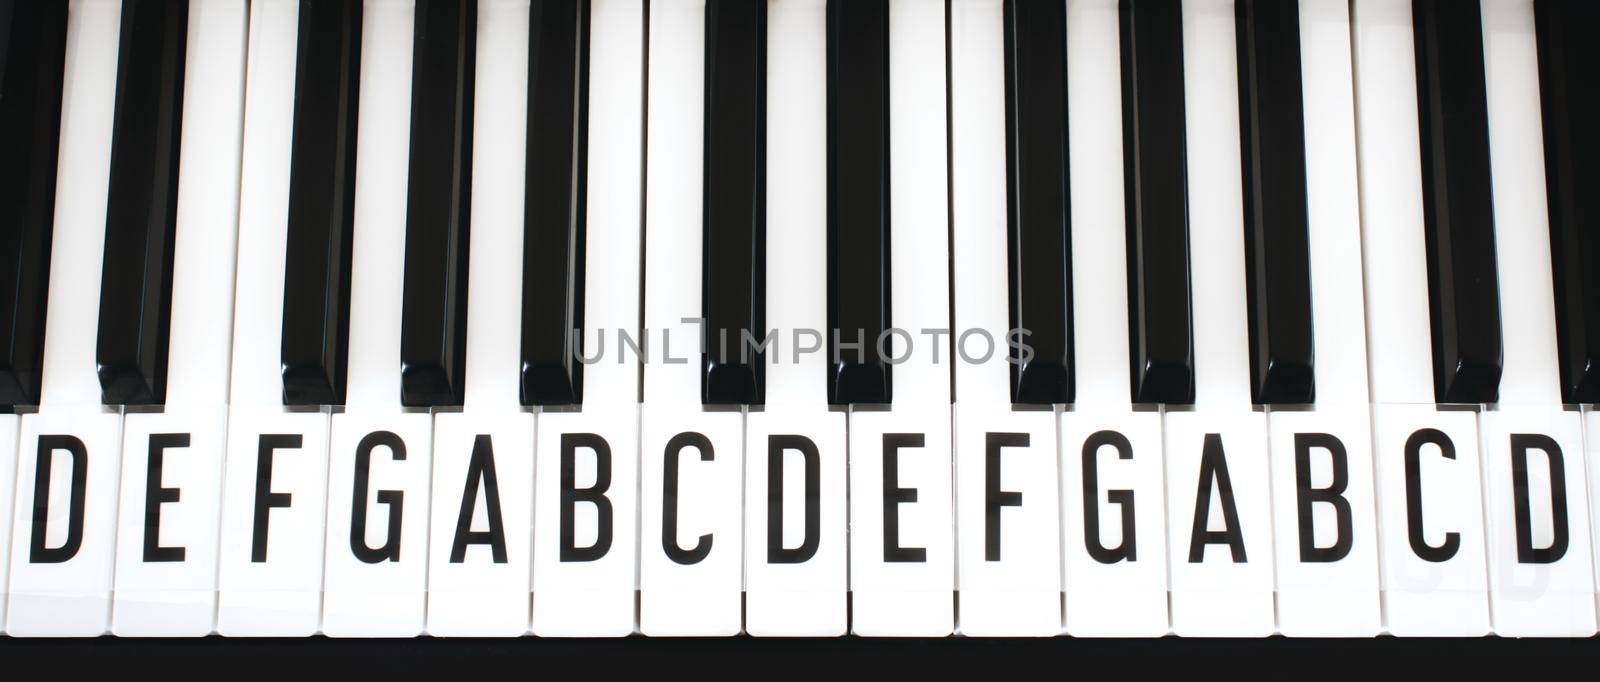 Top-down view of piano keyboard keys with letters of notes of the scale superimposed as a music cheat sheet for a new learner